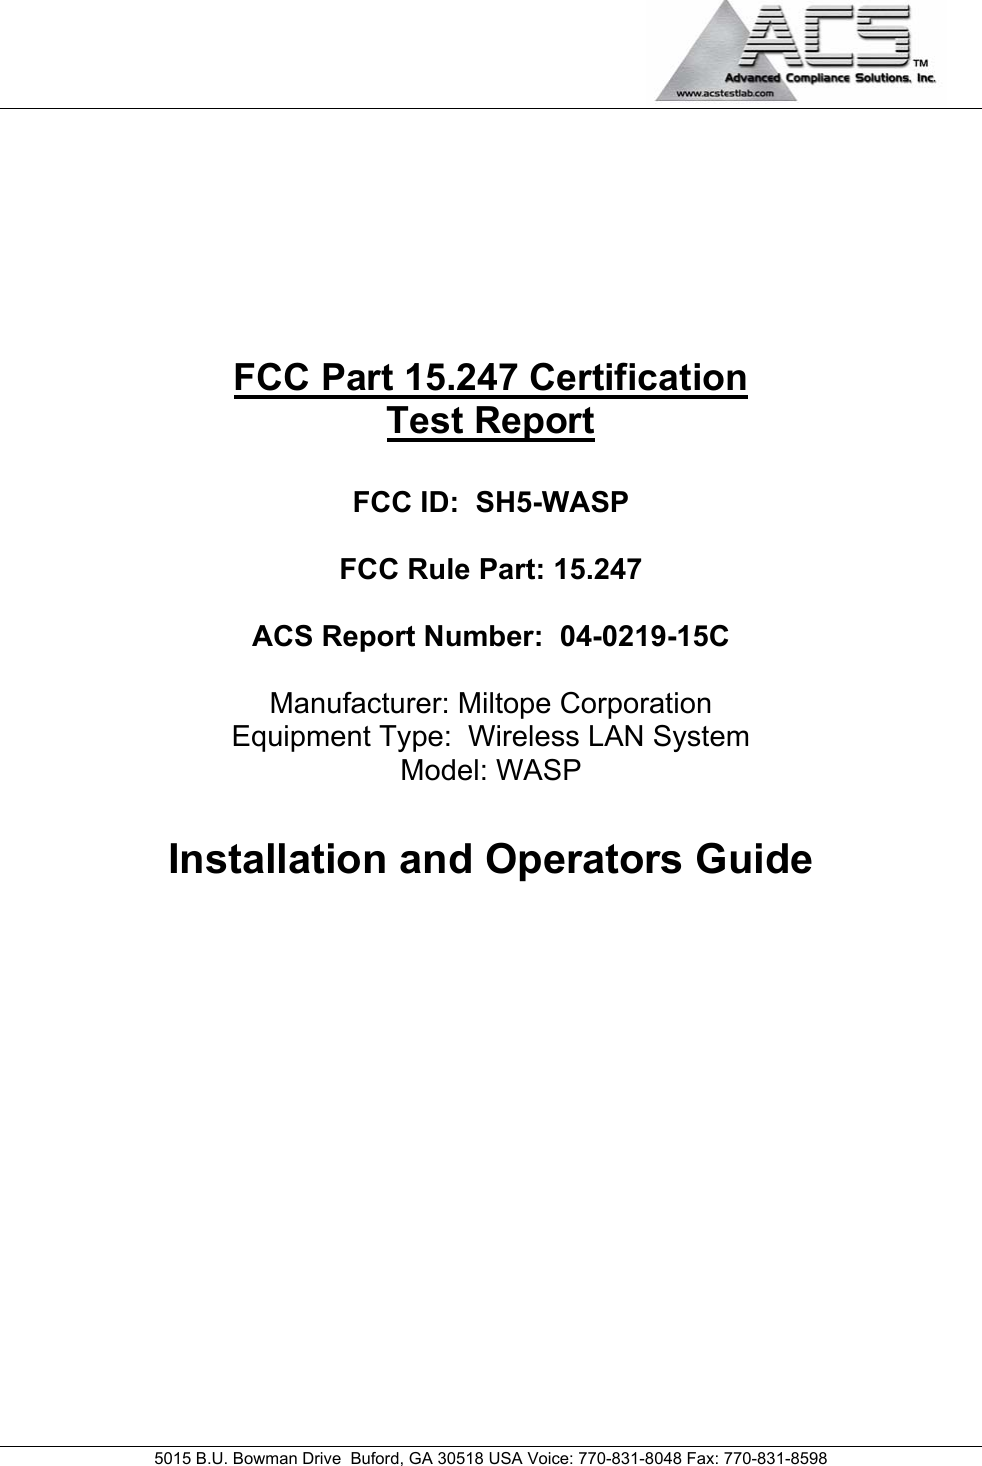                                             5015 B.U. Bowman Drive  Buford, GA 30518 USA Voice: 770-831-8048 Fax: 770-831-8598        FCC Part 15.247 Certification Test Report  FCC ID:  SH5-WASP  FCC Rule Part: 15.247  ACS Report Number:  04-0219-15C   Manufacturer: Miltope Corporation Equipment Type:  Wireless LAN System Model: WASP  Installation and Operators Guide            